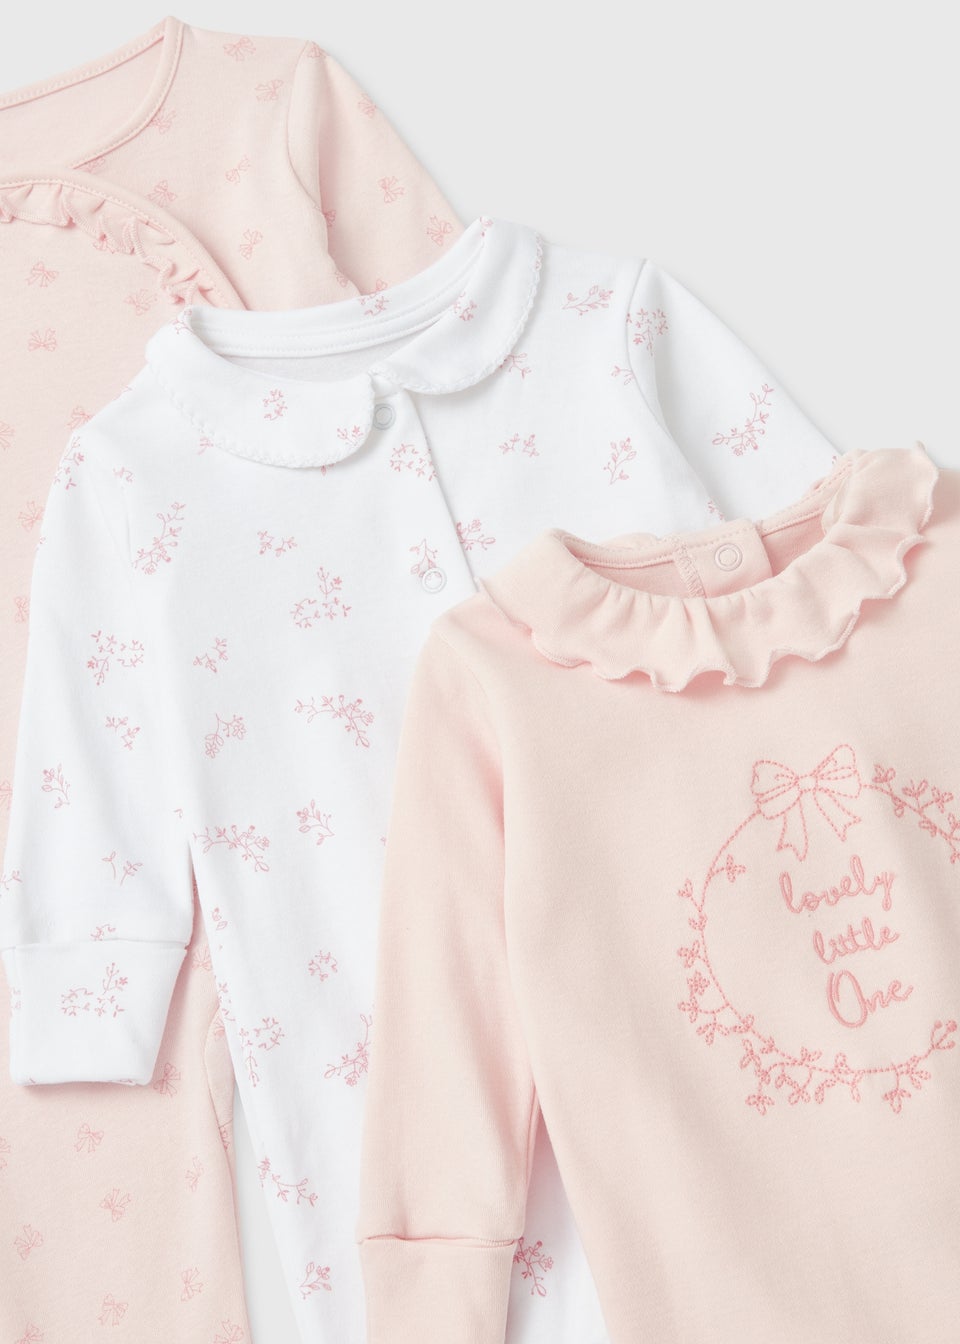 Baby 3 Pack Pink Sleepsuits (Tiny Baby-18mths)